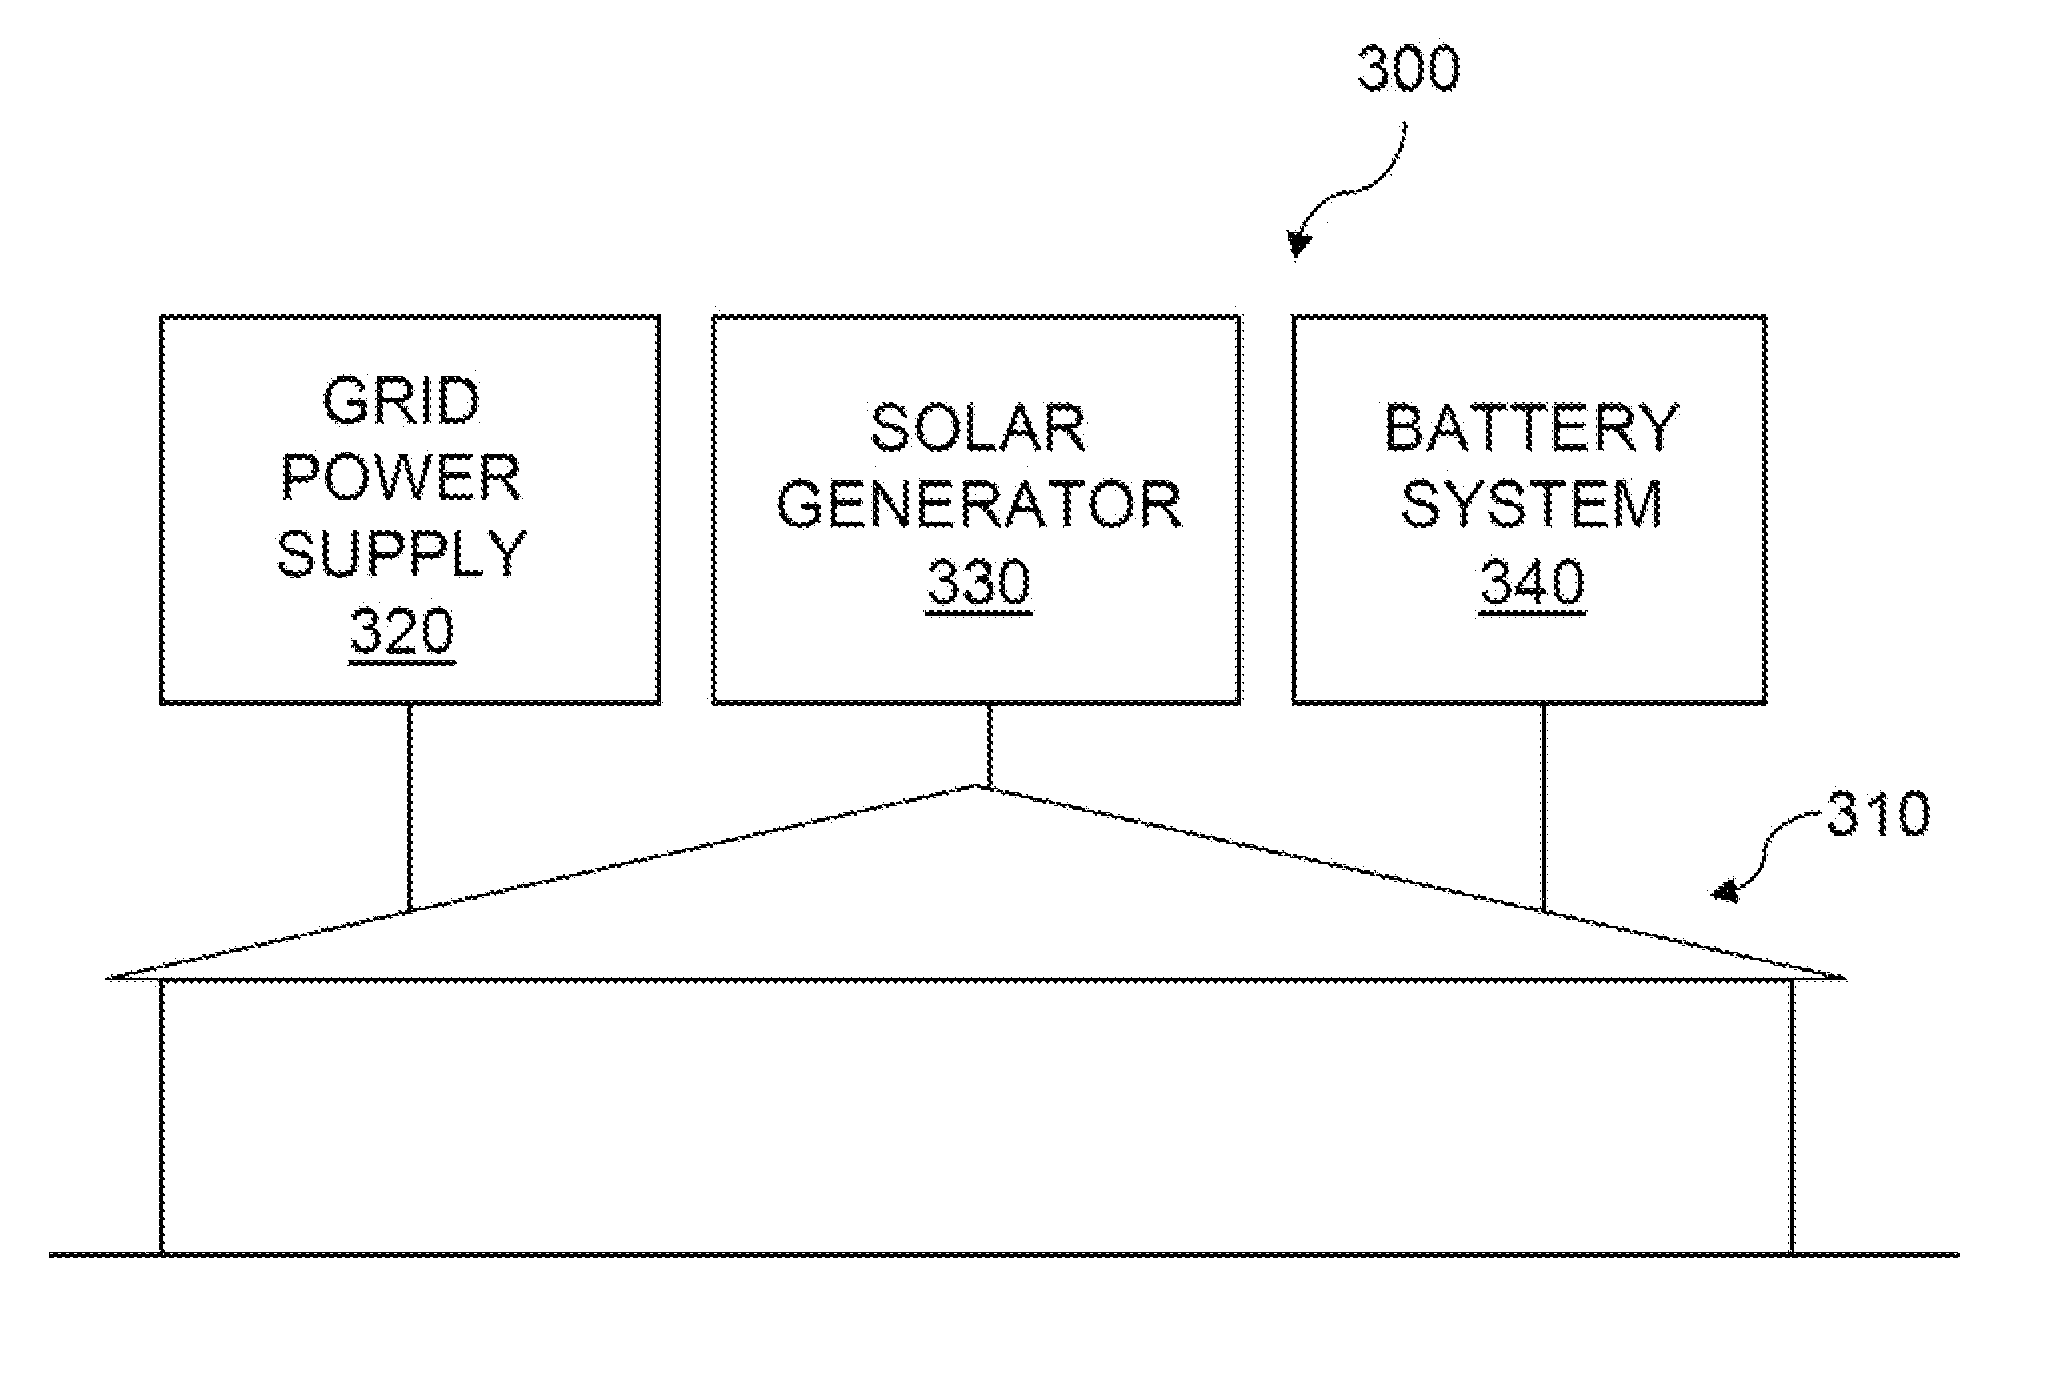 Method and System for Reducing Peak Load Charge on Utility Bill Using Target Peak Load and Countermeasures